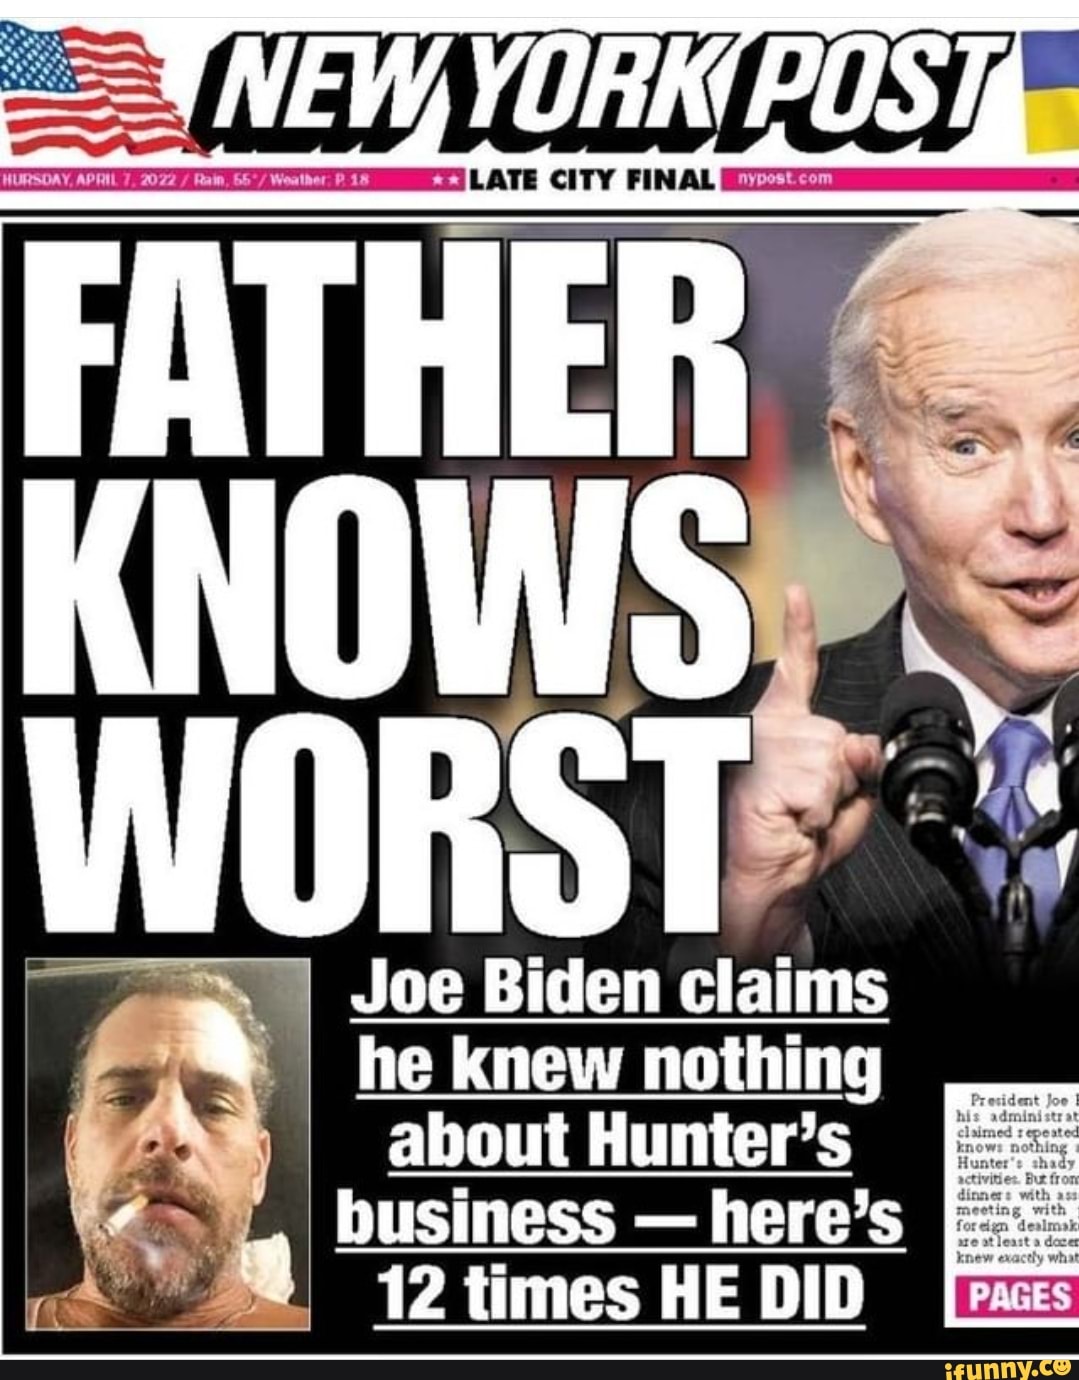 LATE CITY FINAL KNOWS Joe Biden claims he knew nothing about Hunter's ...